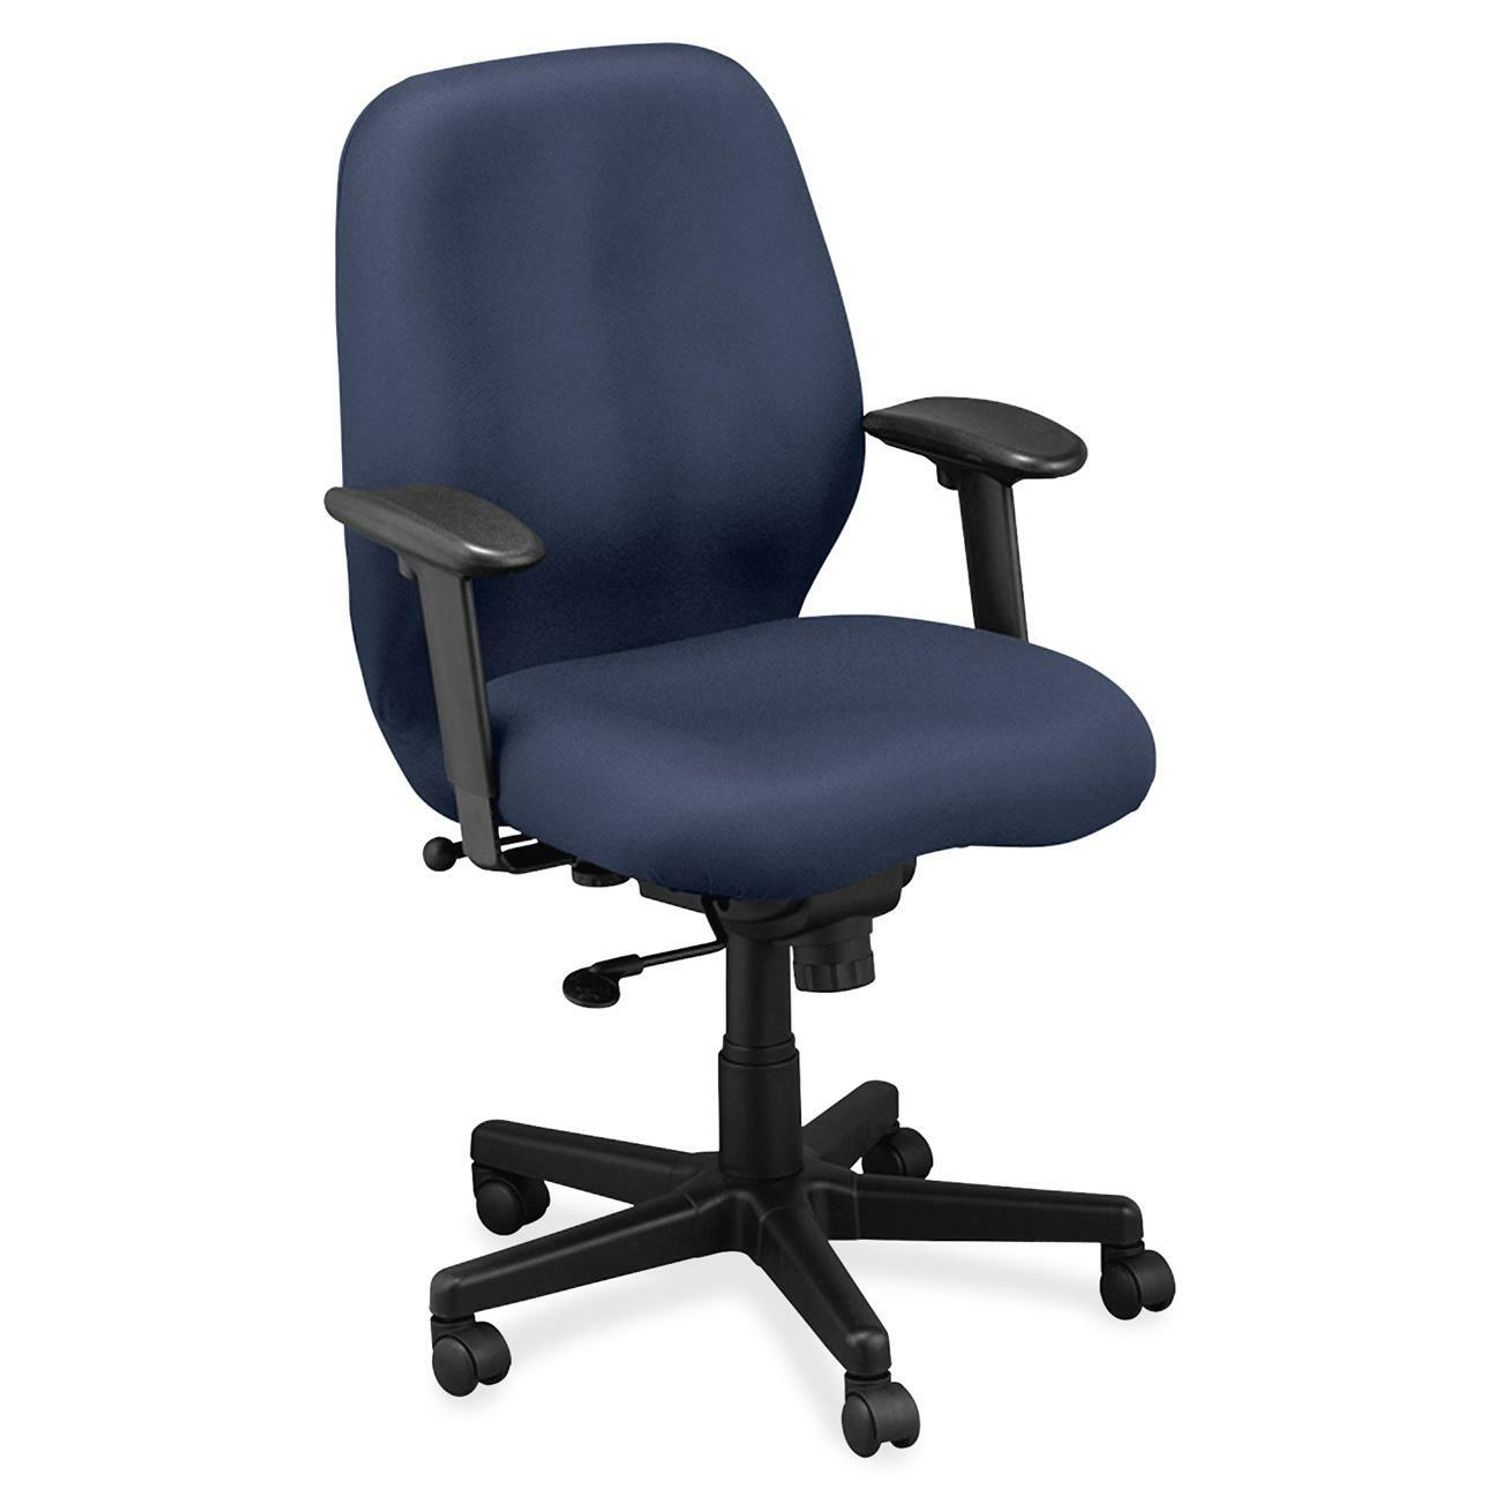 Aviator Task Chair Blueberry Fabric Seat, Blueberry Fabric Back, 5-star Base, 1 Each